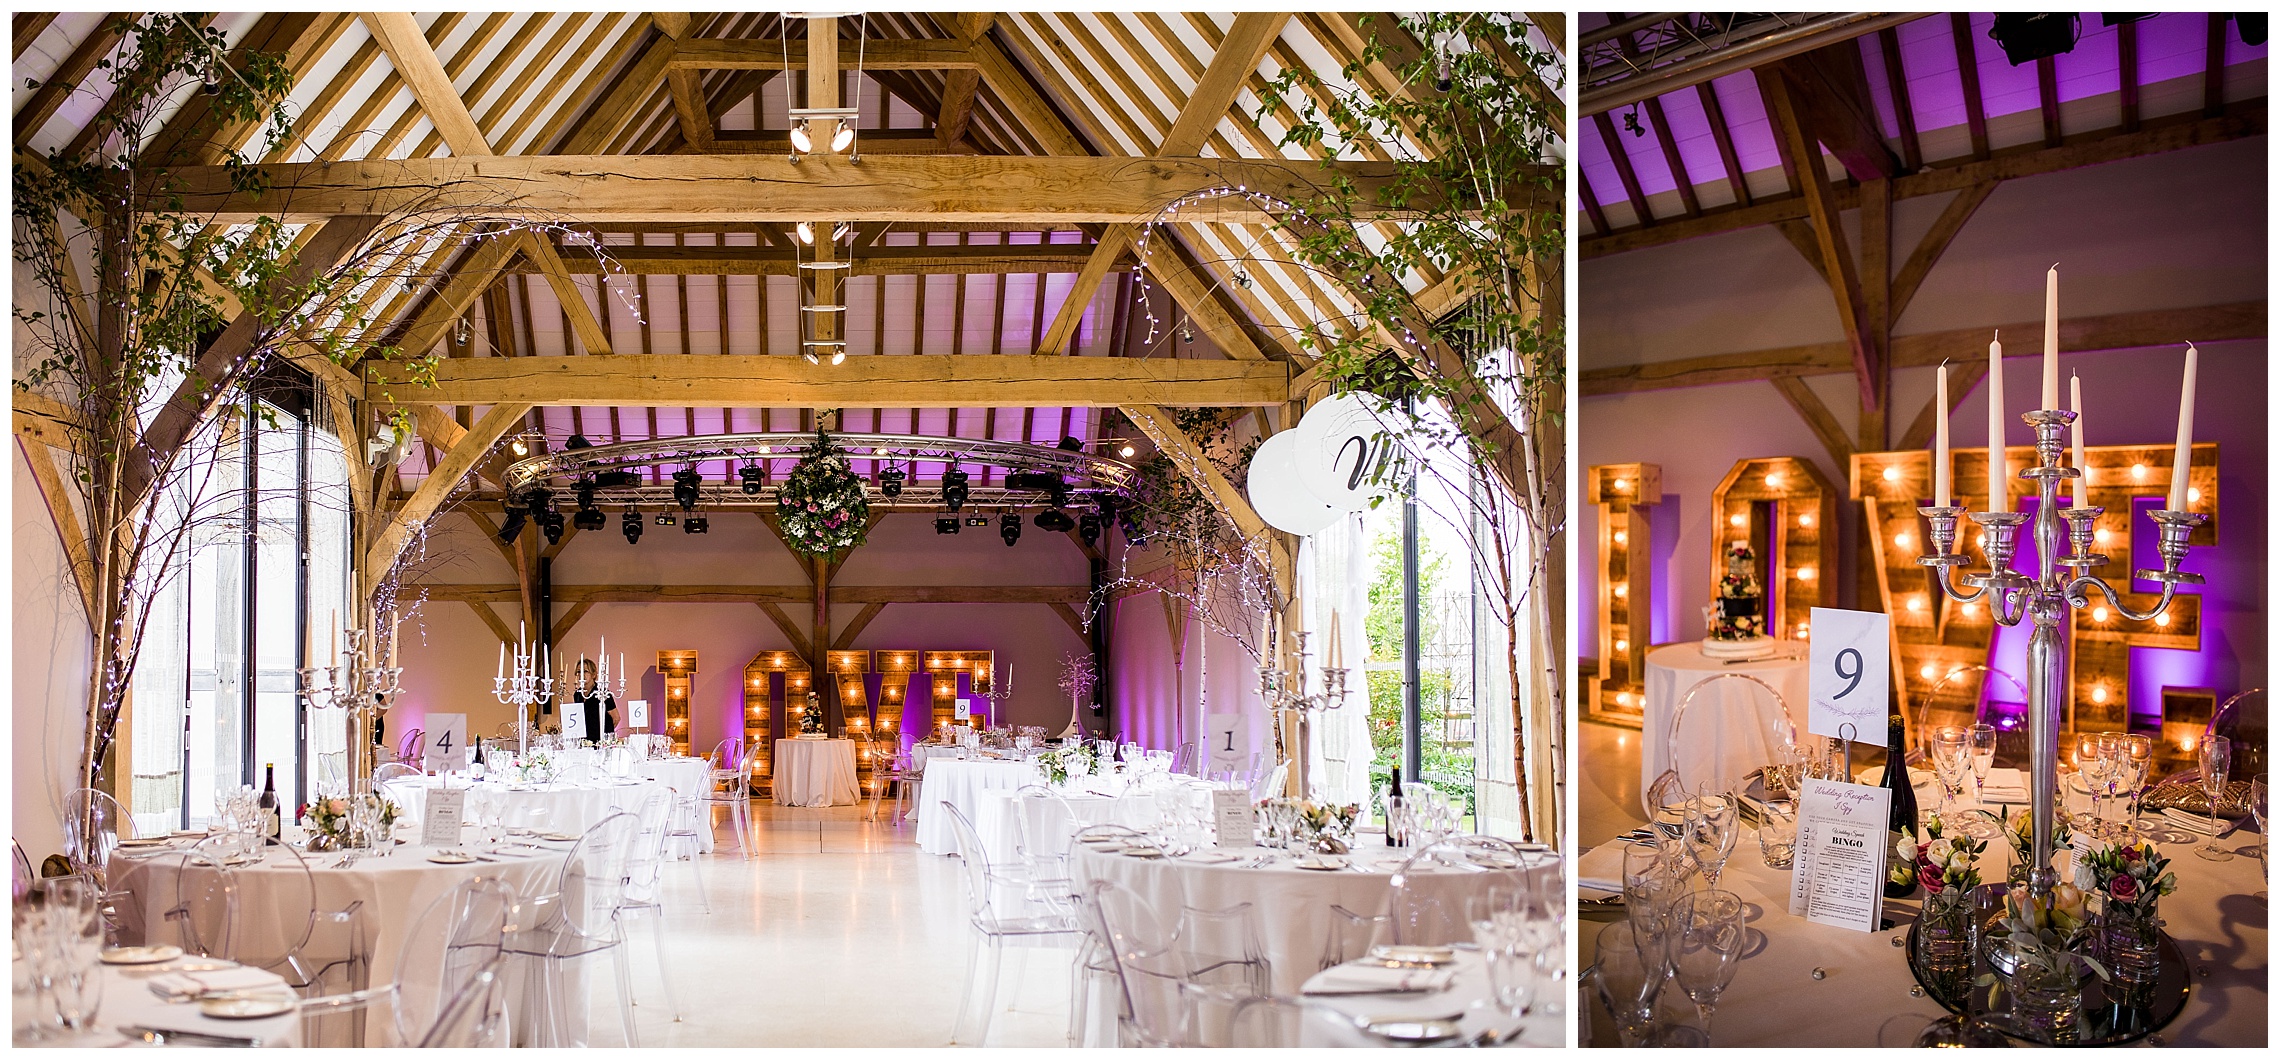 barn wedding venue with pink uplights and wooden love letters